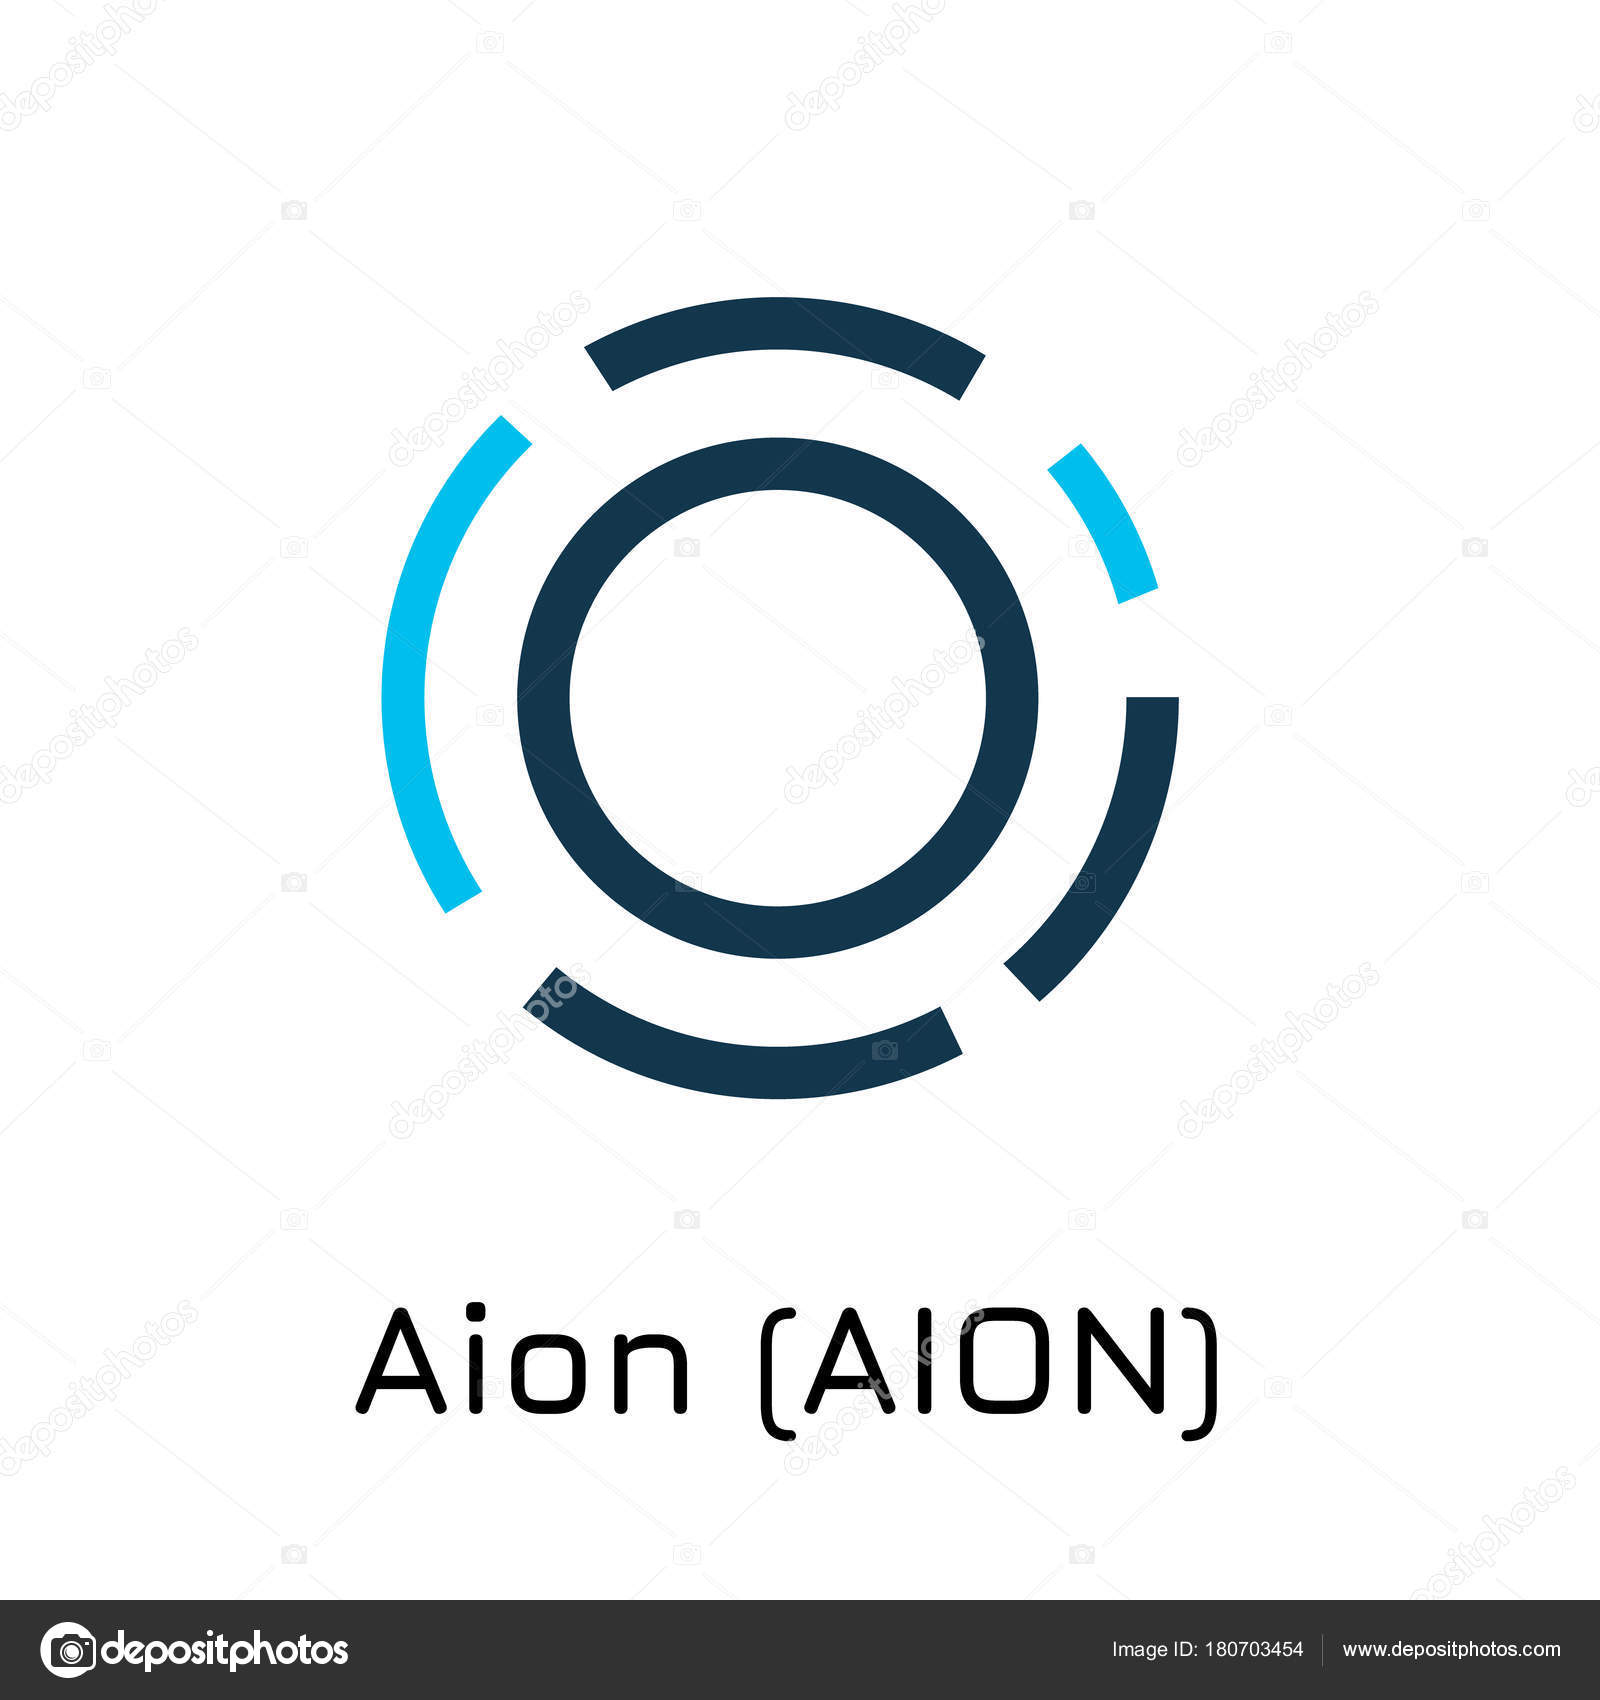 How to buy aion crypto обмен биткоин руб на доллар